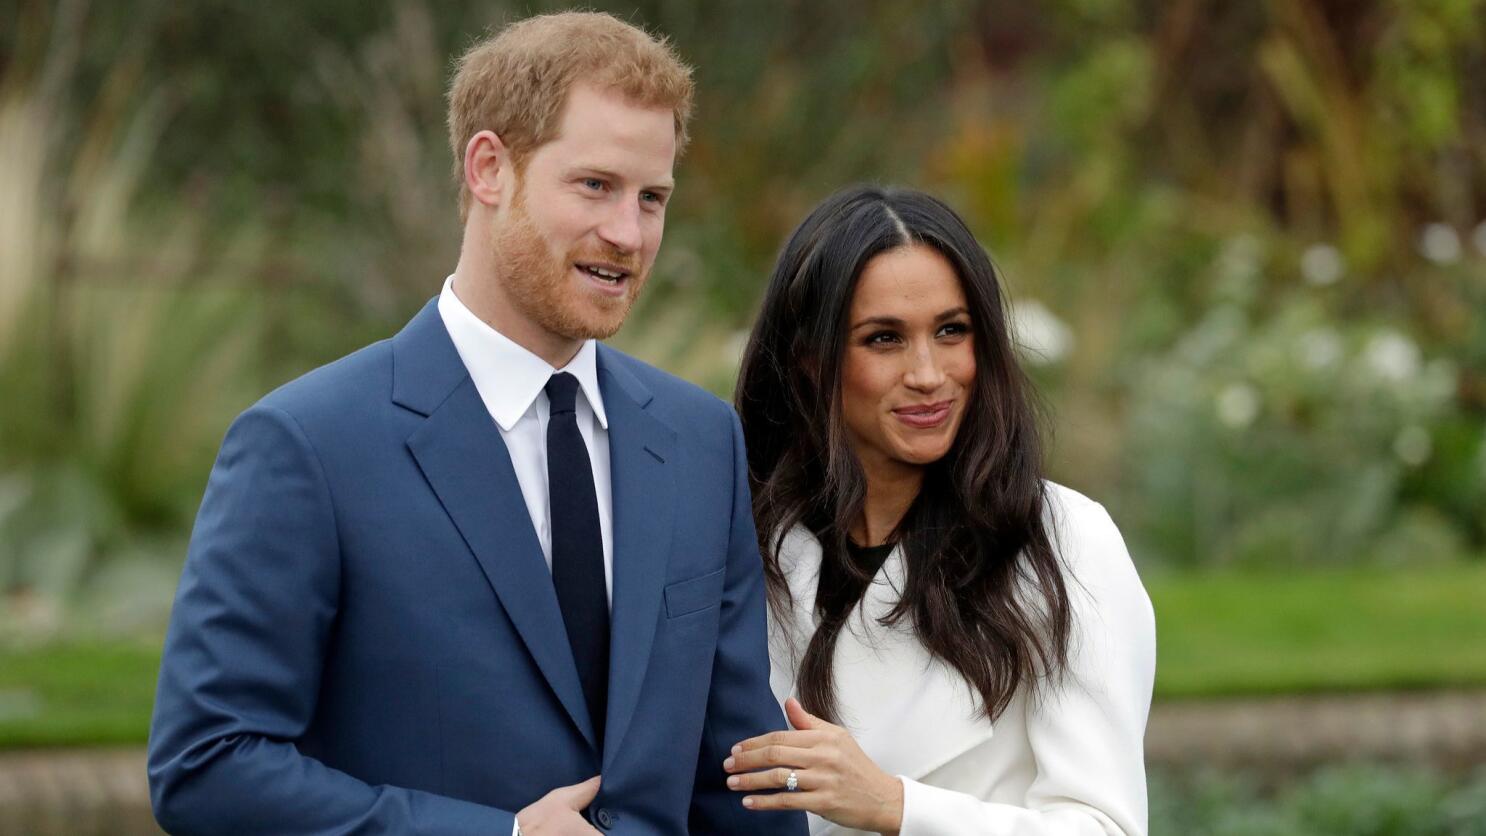 Meghan Markle's bag from Scottish label sells out, UK, News